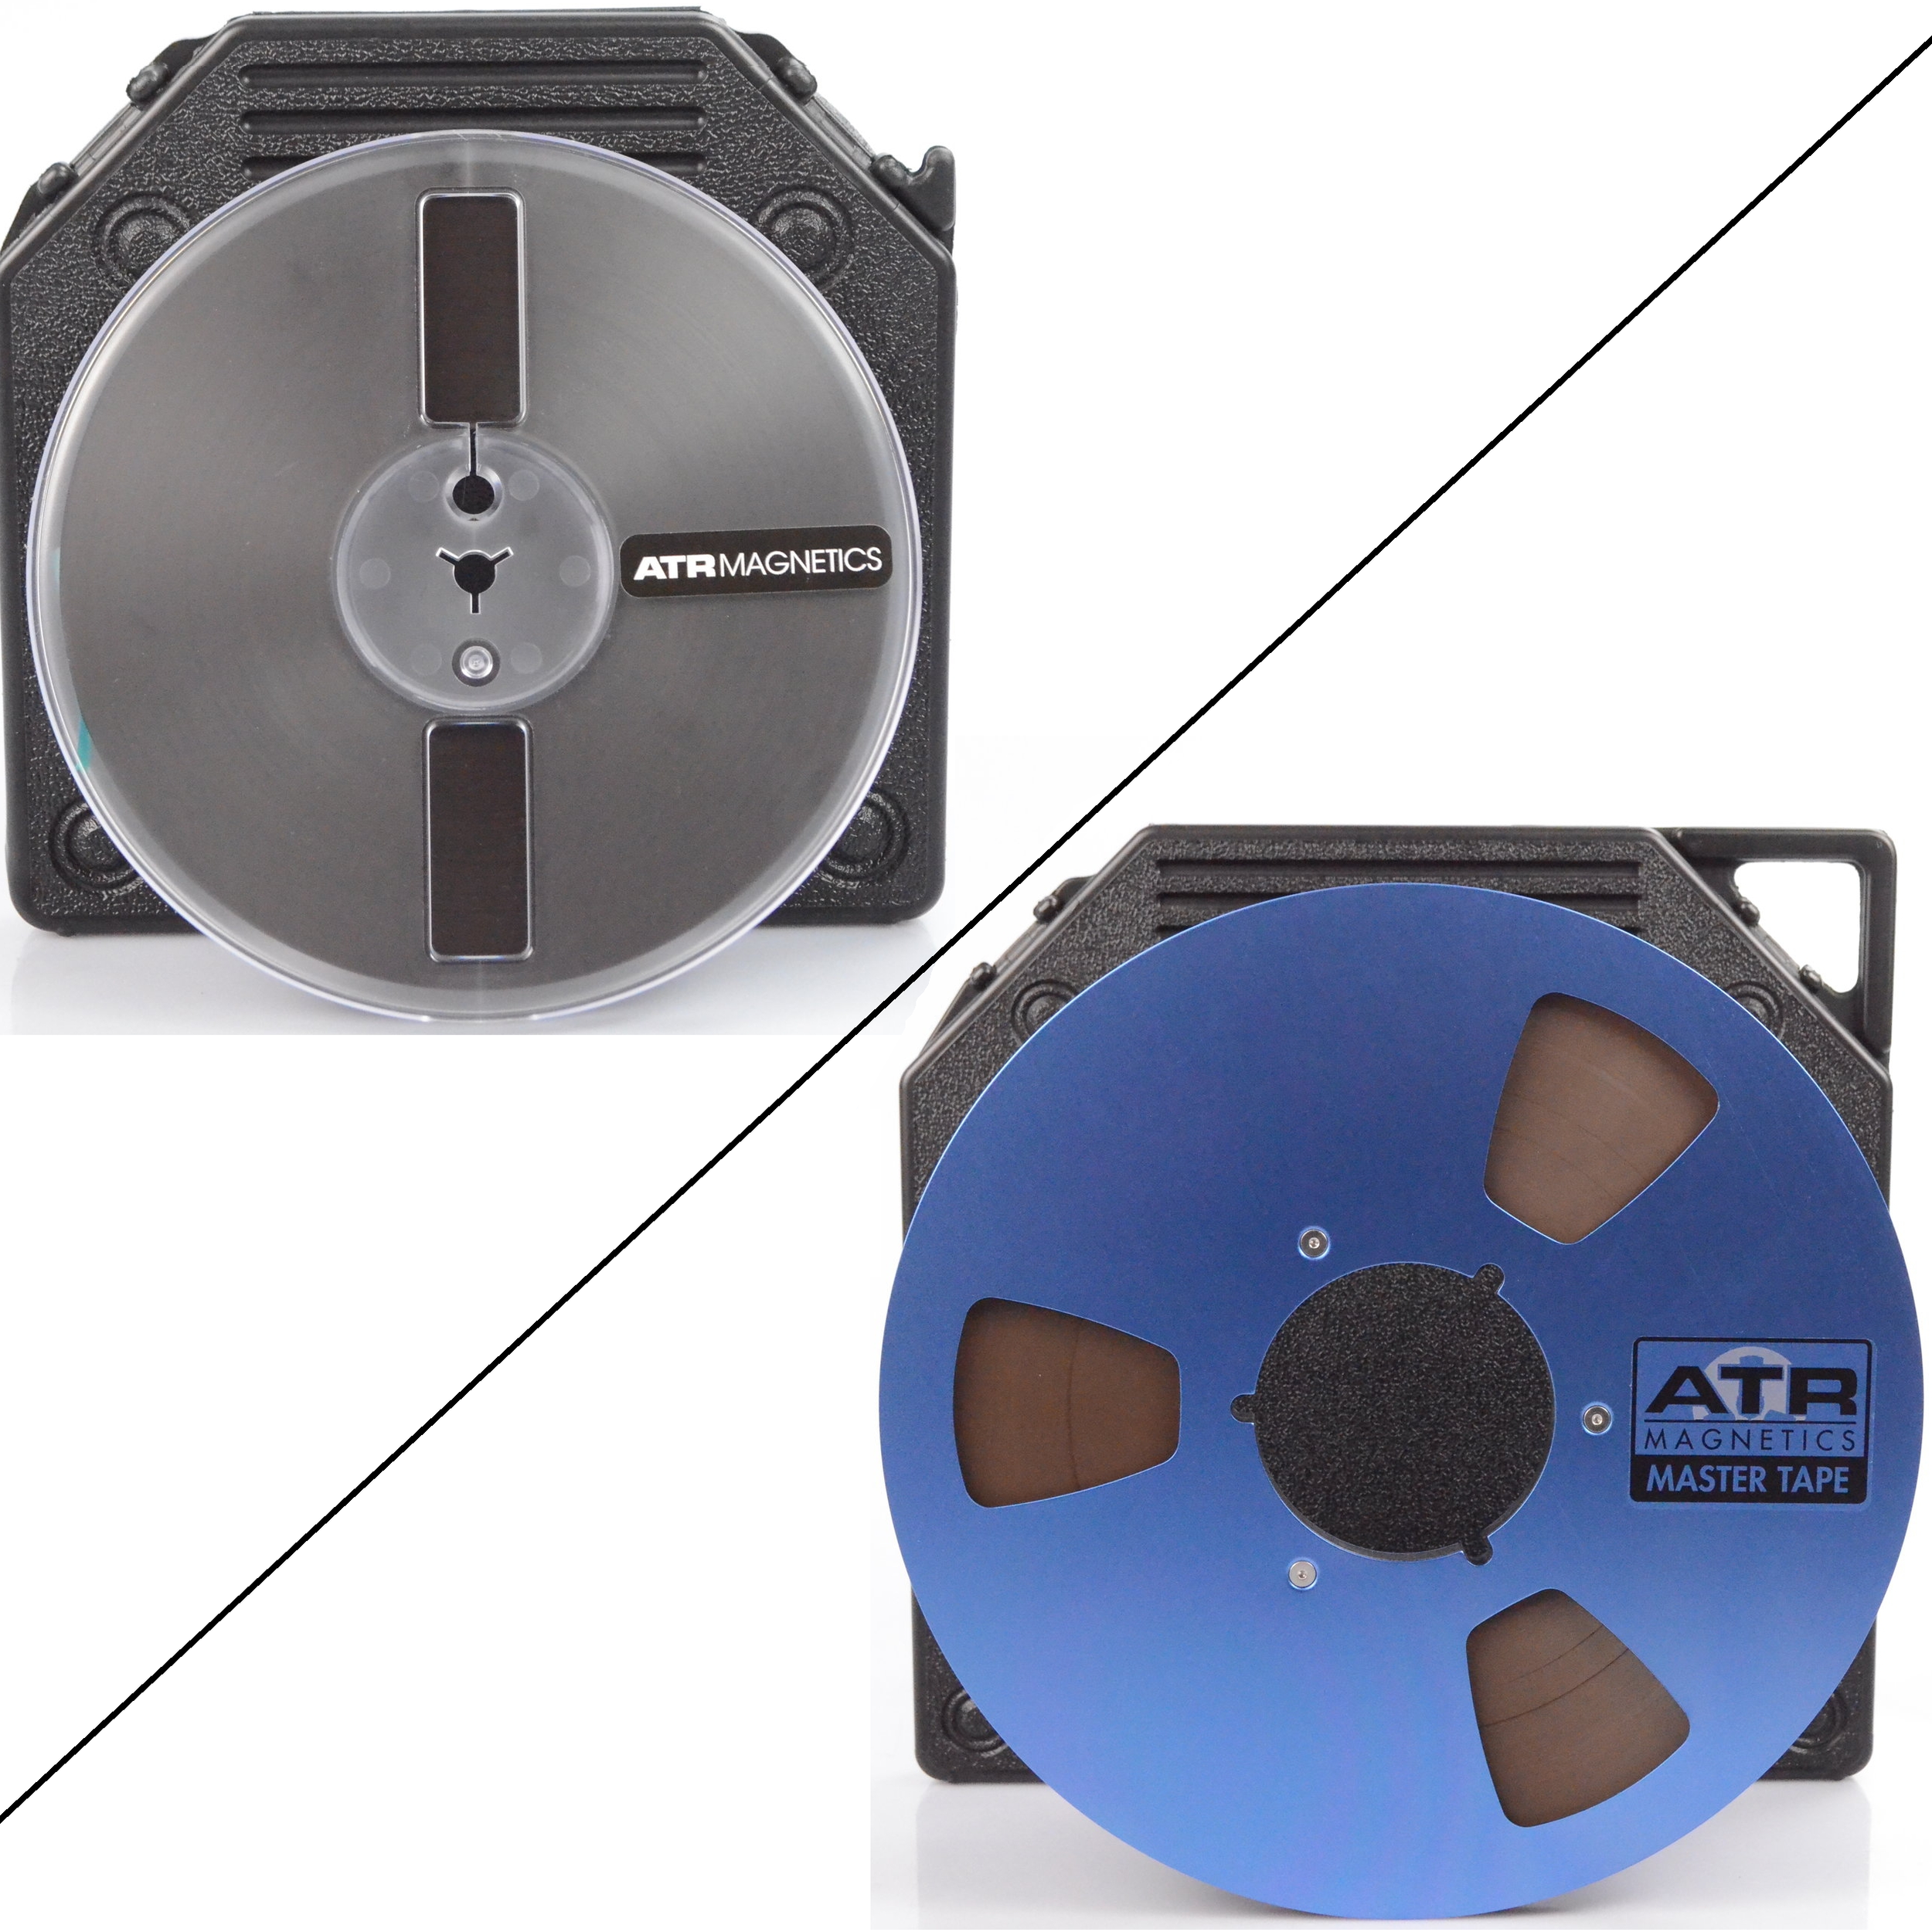 Long Play Analog Recording Tape by ATR Magnetics, 1/4 7 Inch Empty Aluminum  Alloy Take Up Reel to Reel Small Hub, Tape Reel Empty Disc Opening Machine